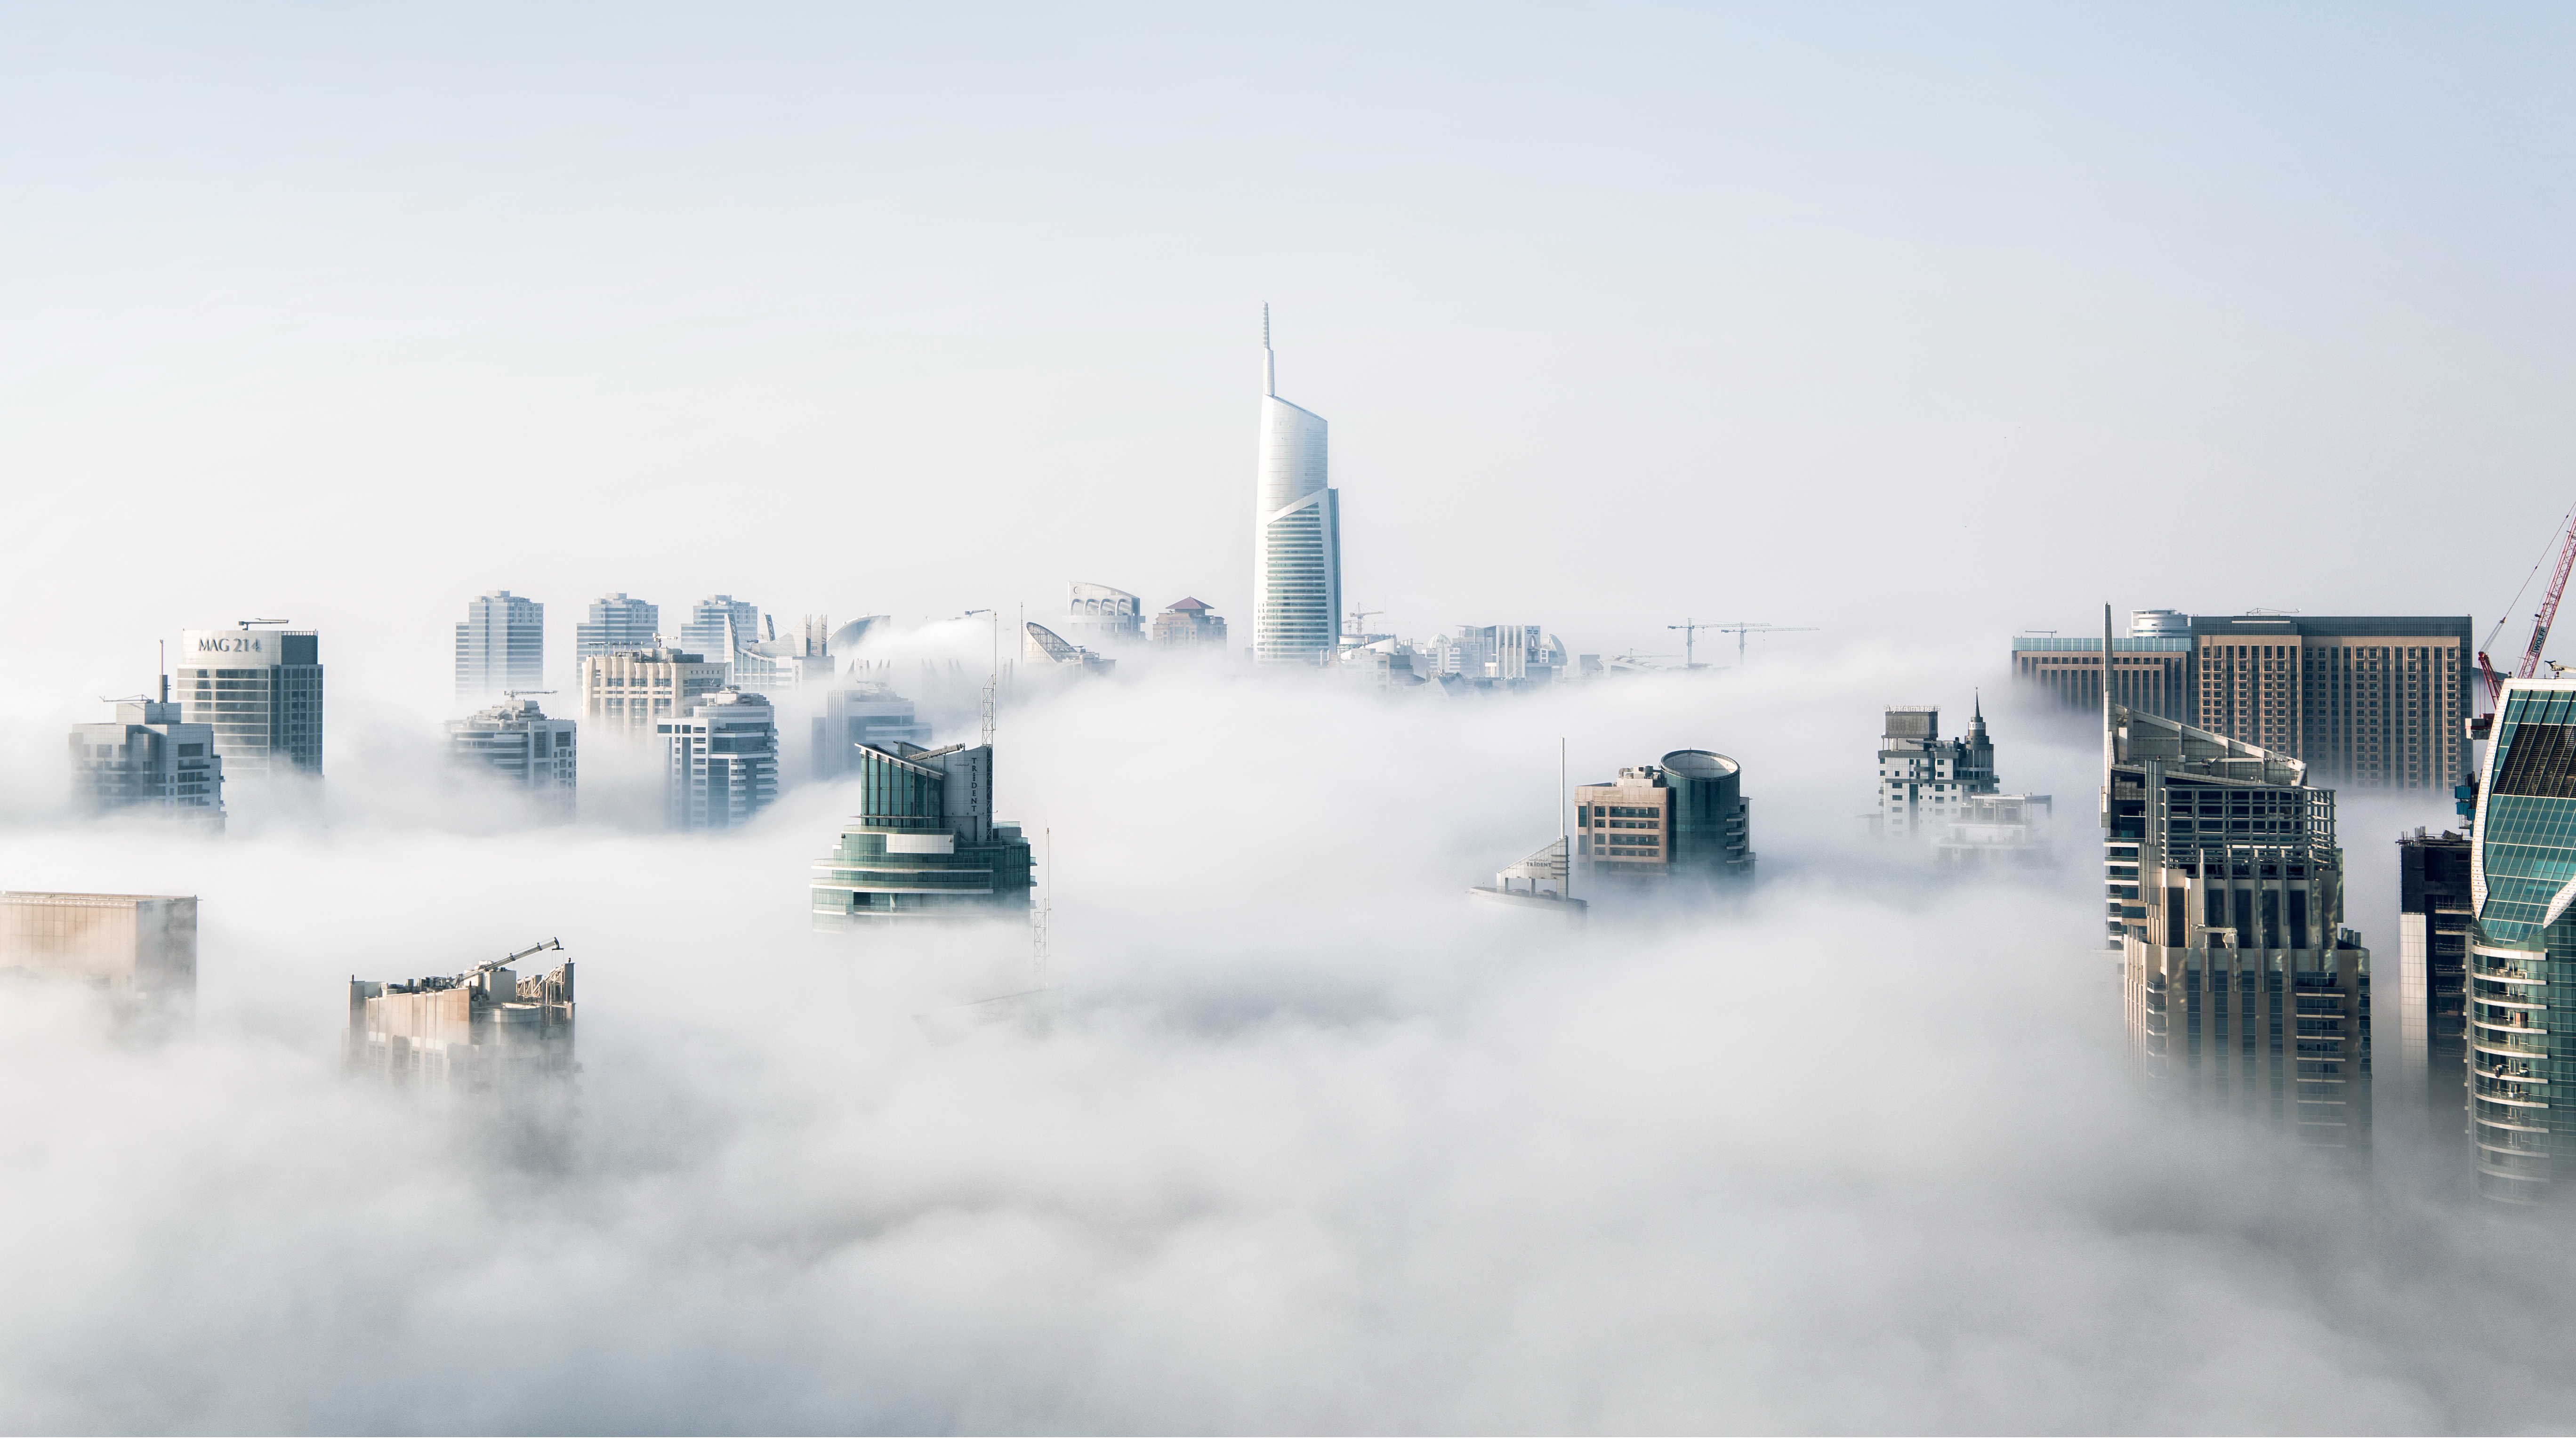 https://adgully.me/post/320/stc-and-alibaba-invests-us-238m-to-establish-alibaba-cloud-in-saudi-arabia